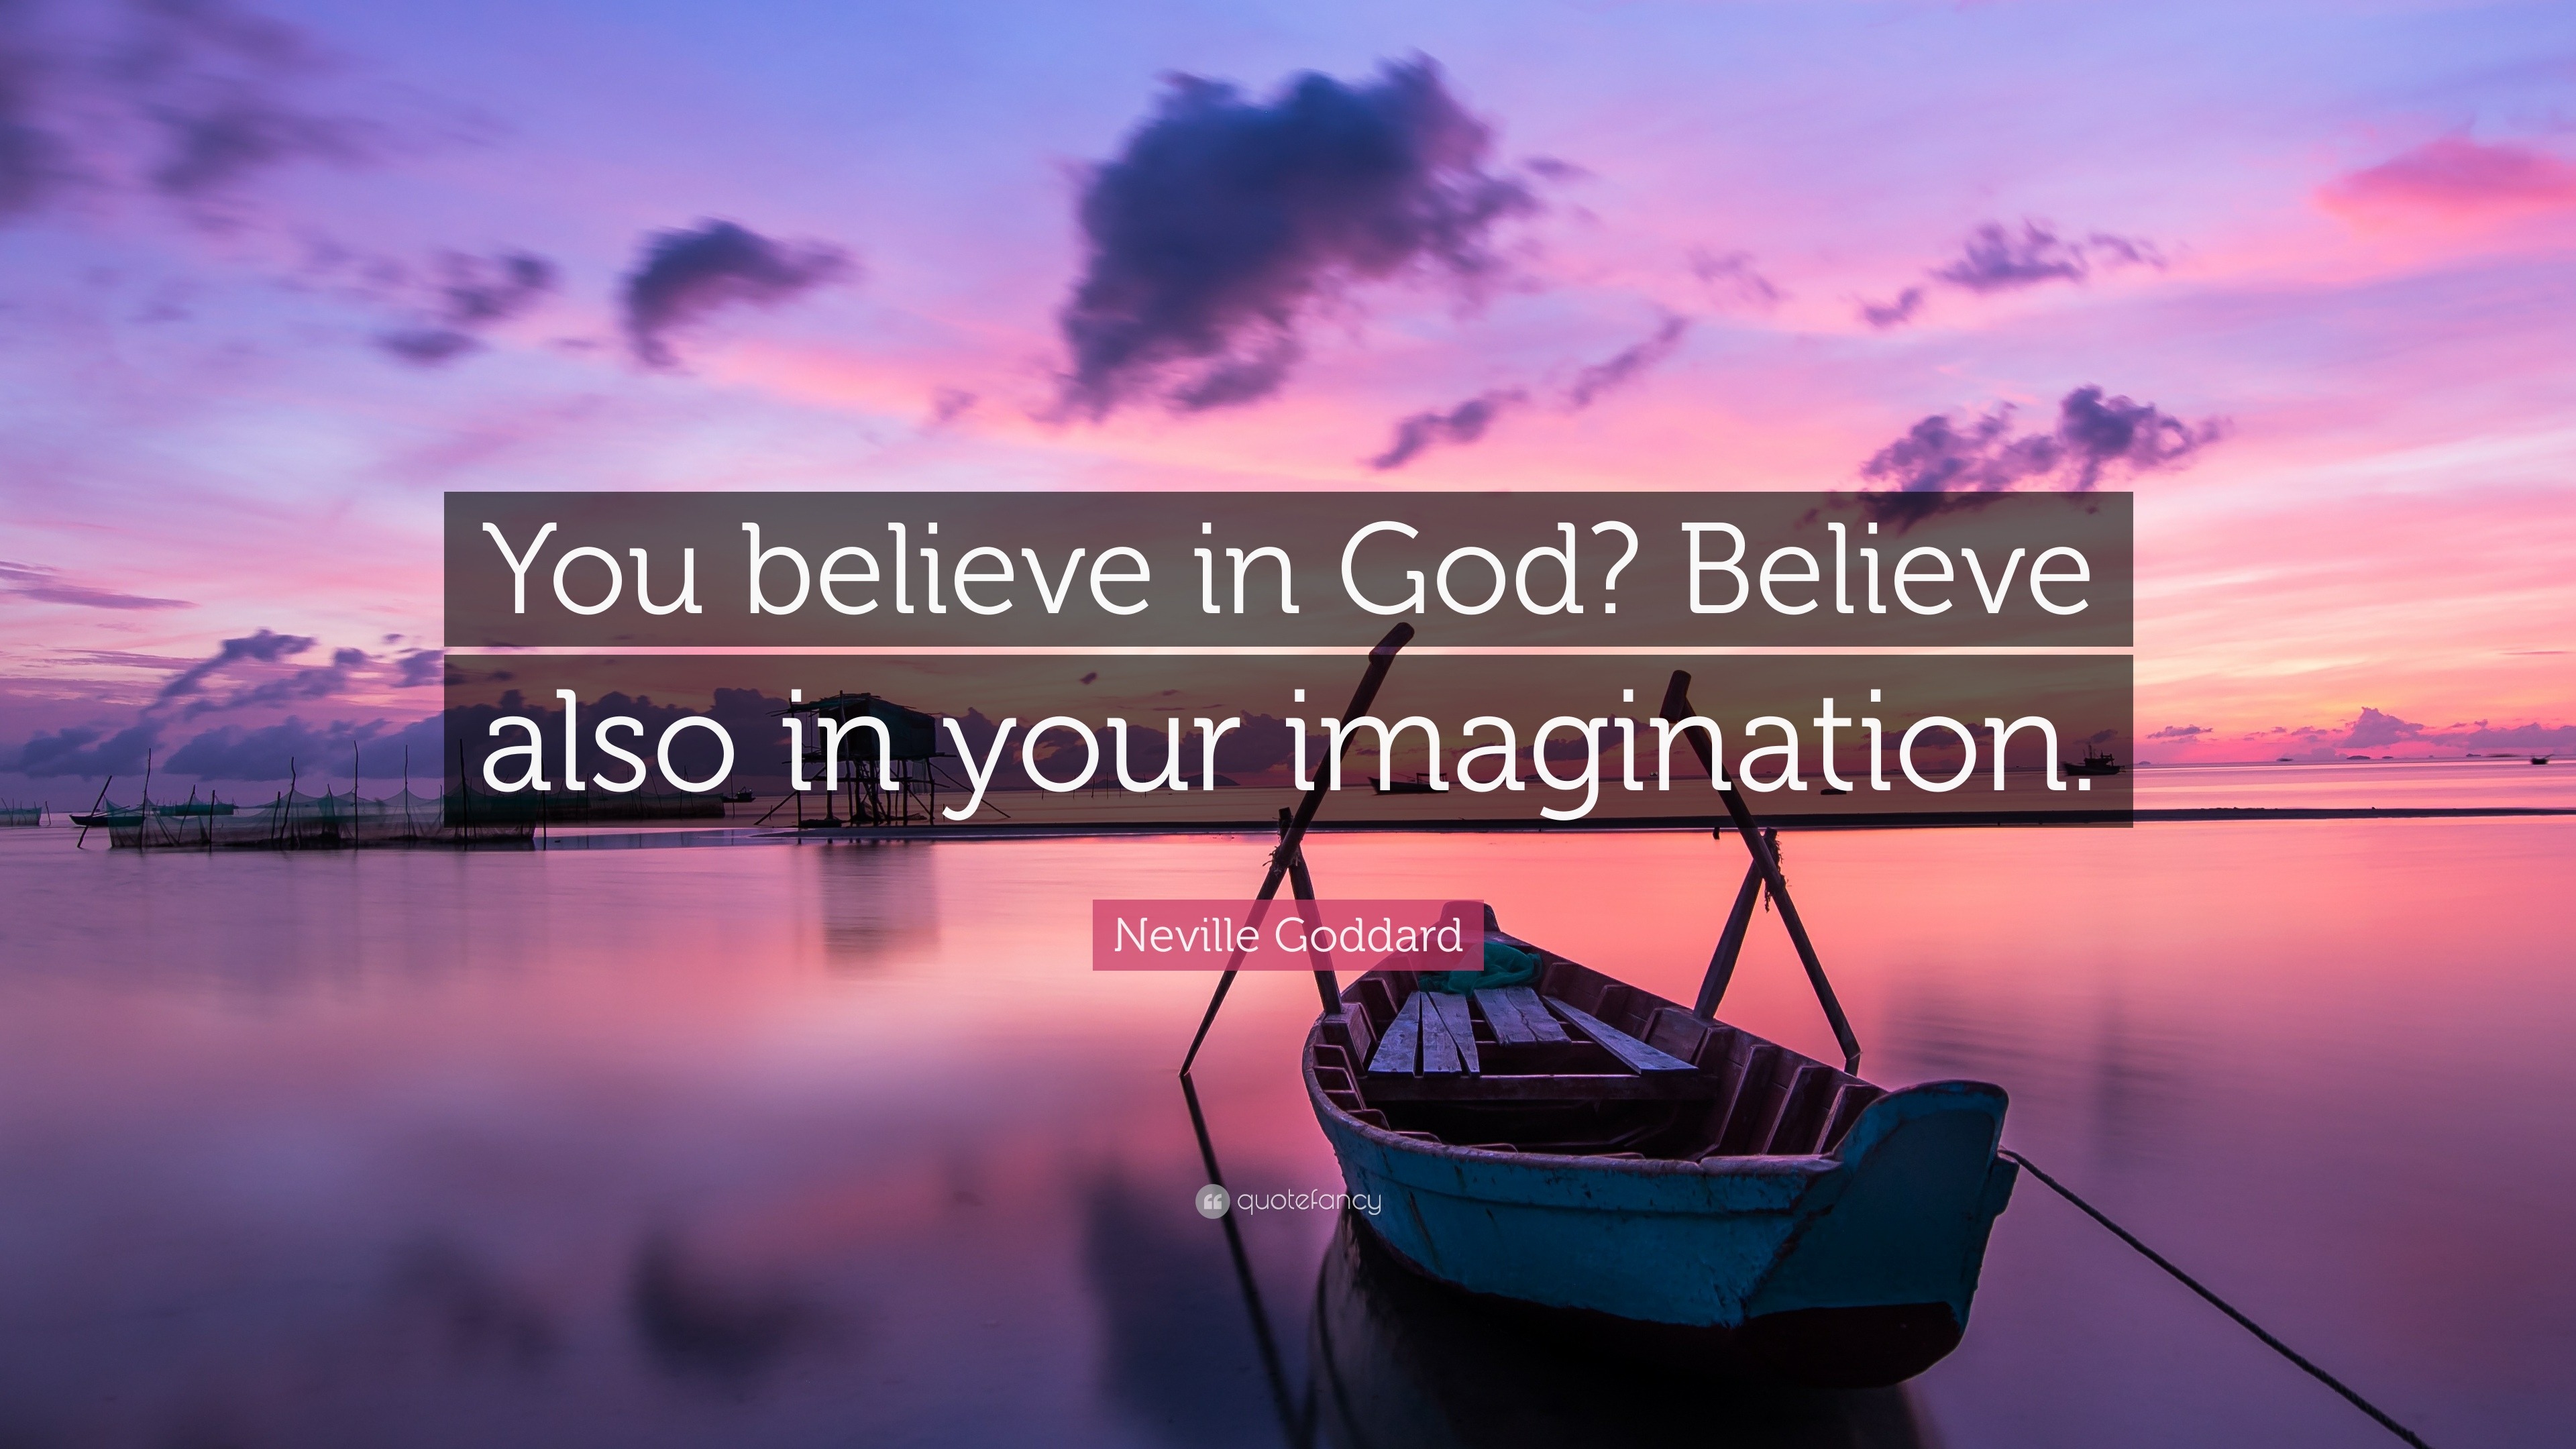 Neville Goddard Quote: “You believe in God? Believe also in your  imagination.”